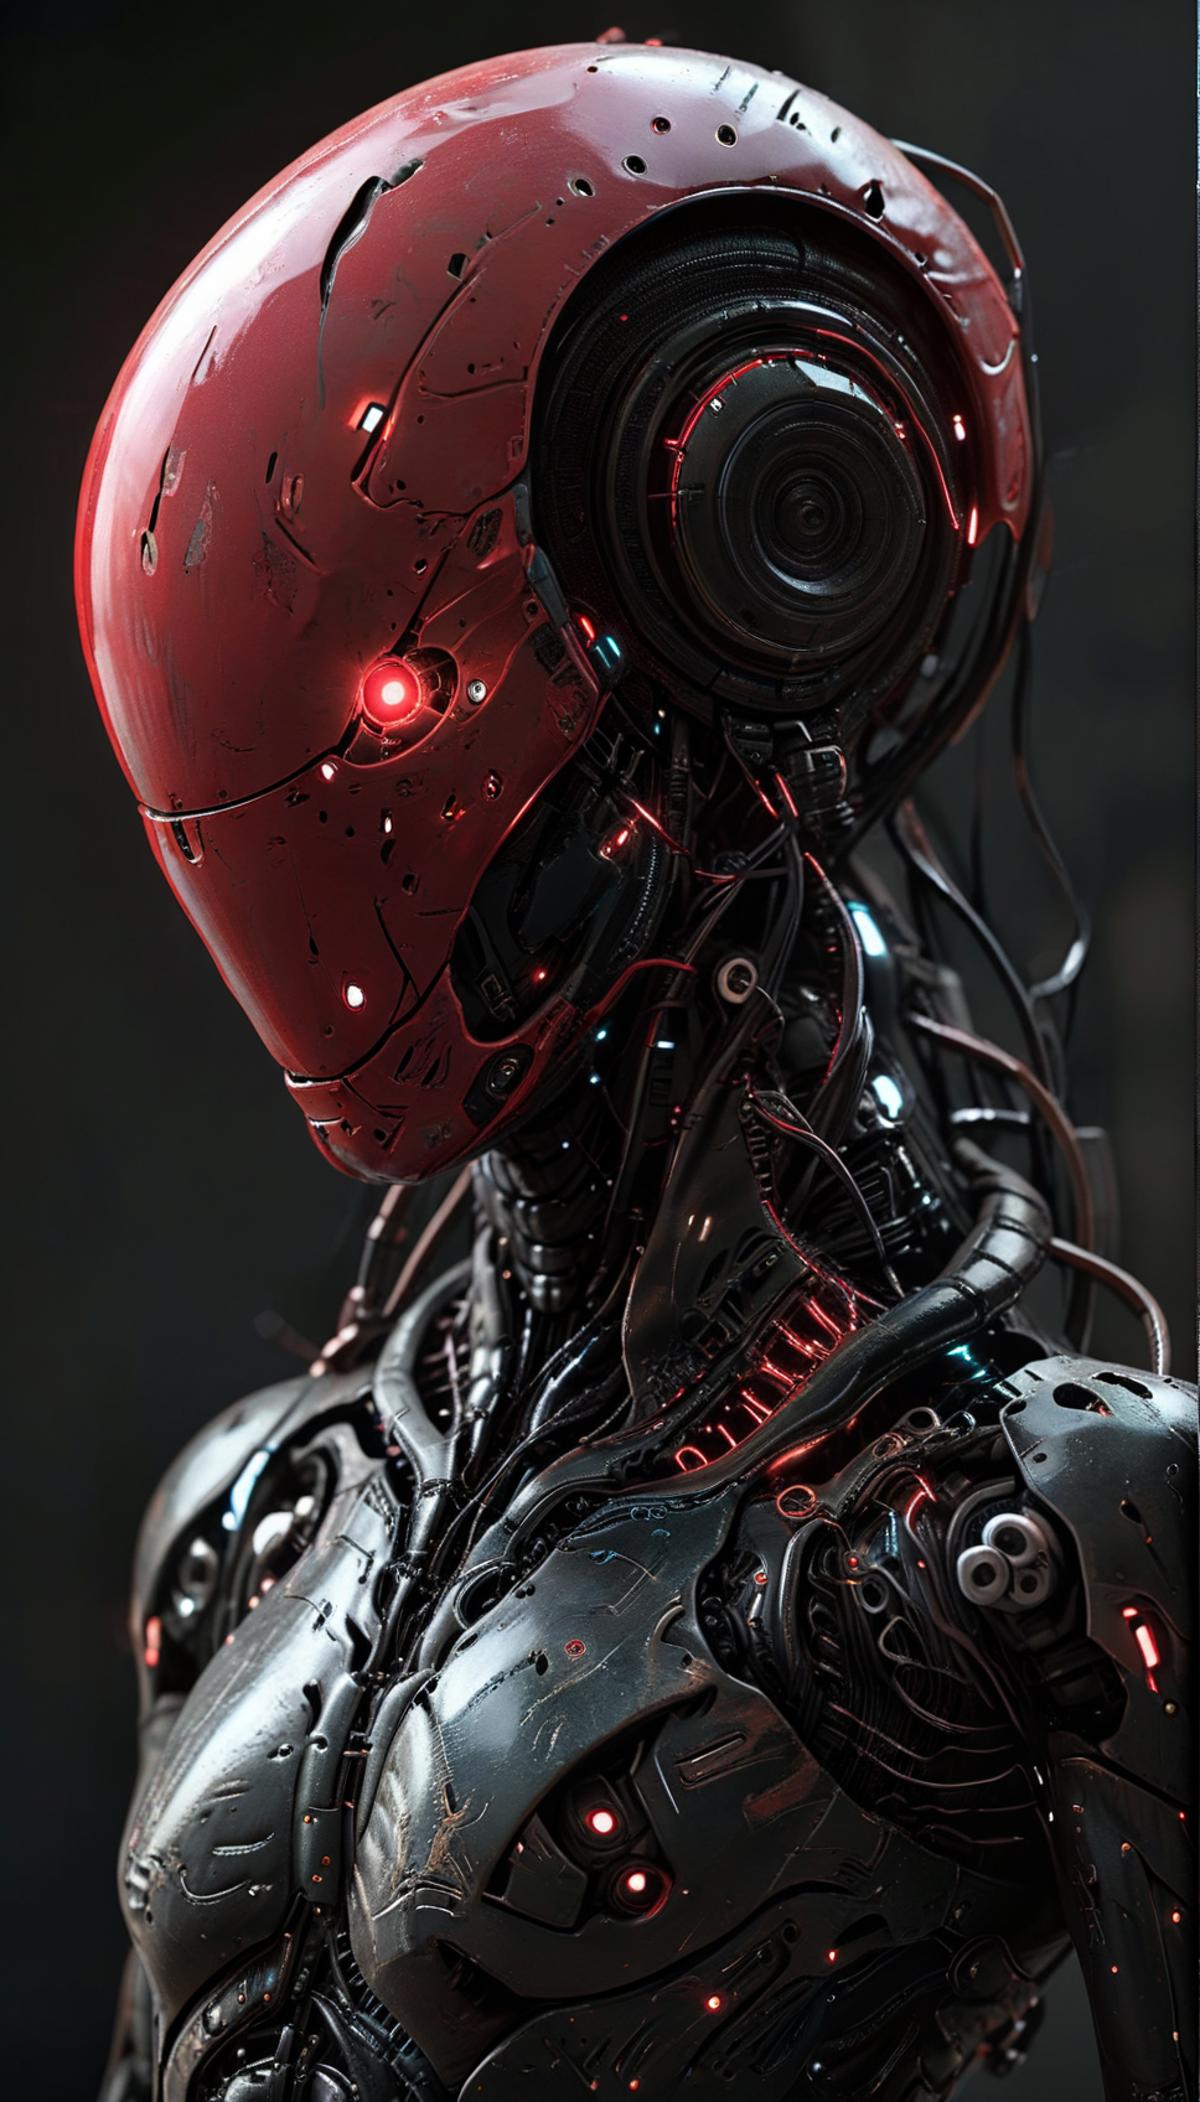 Robotic Head with Red Skin and Multiple Wires and Circuits.